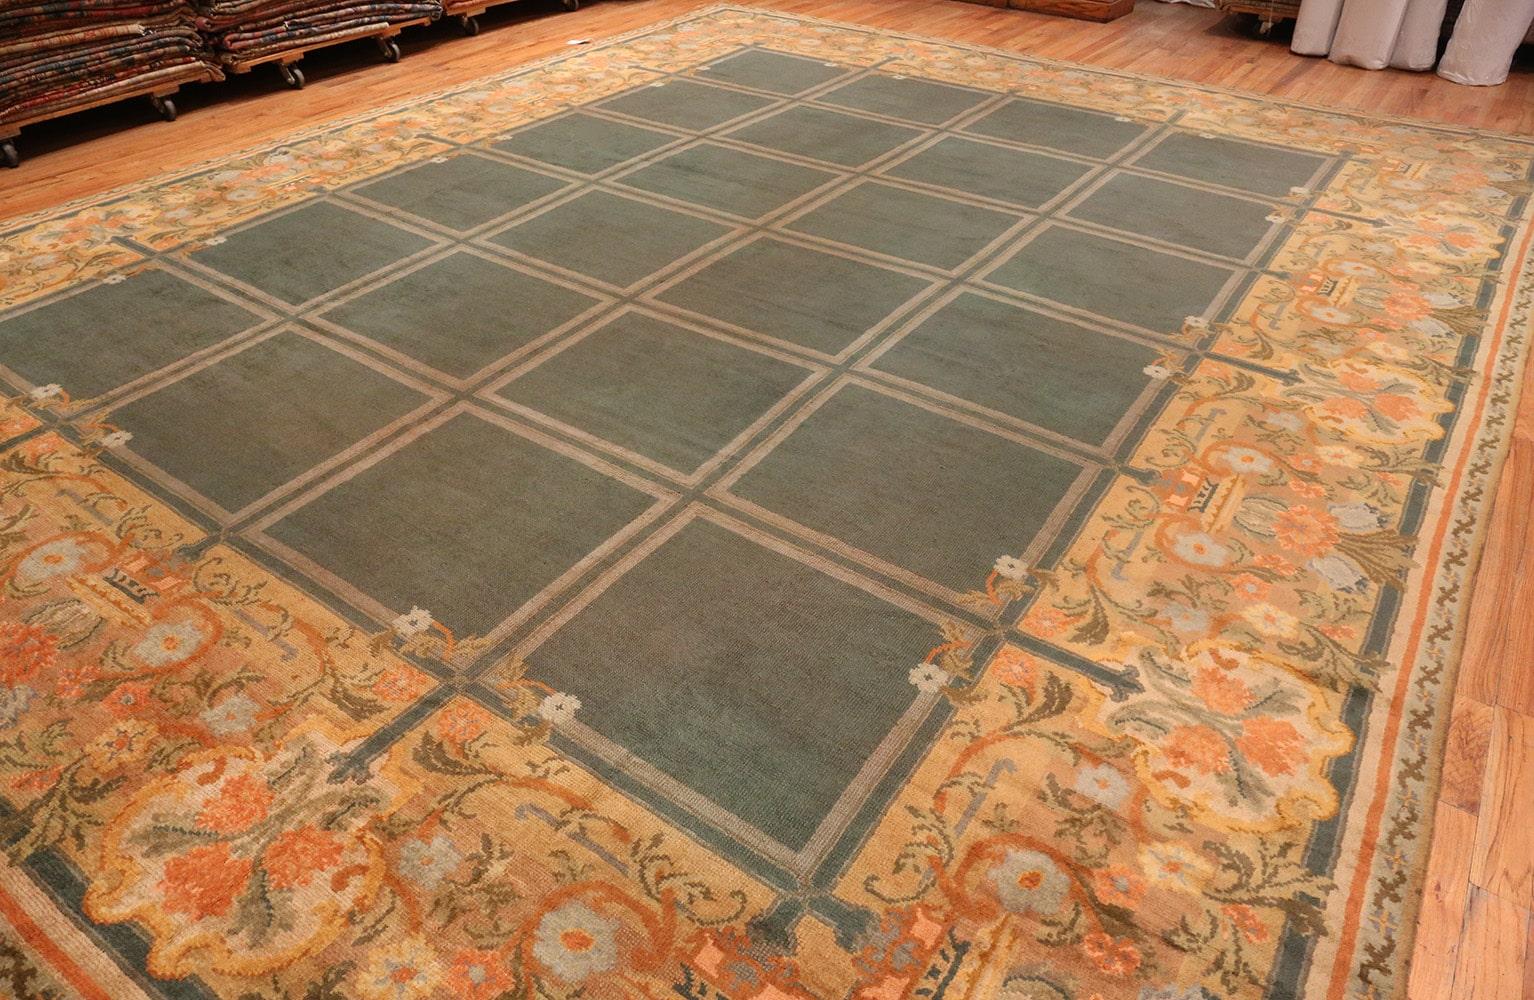 Hand-Knotted Large Green Antique Spanish Savonnerie Carpet. Size: 15 ft 6 in x 19 ft